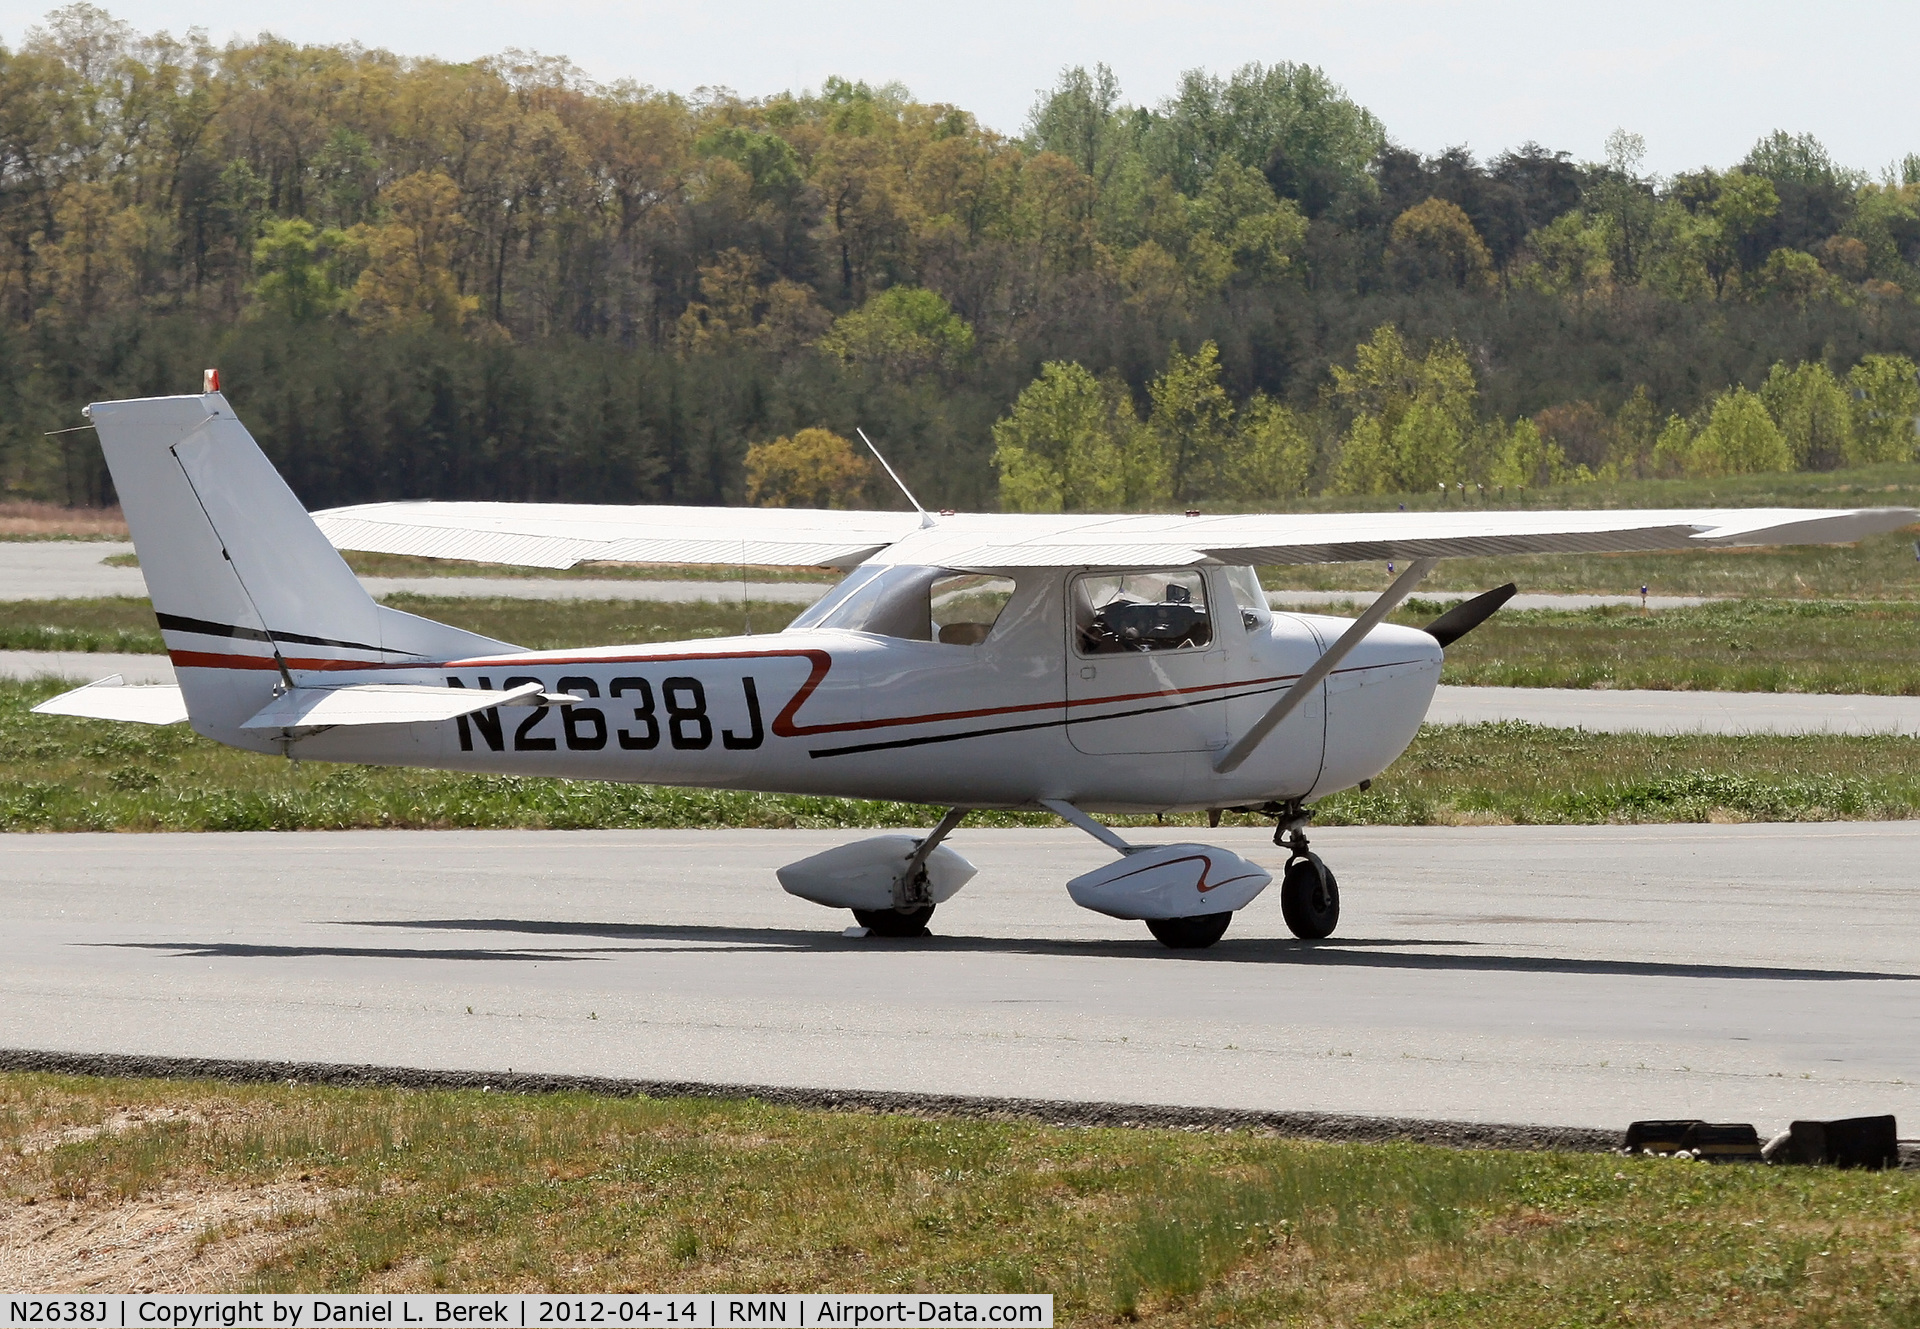 N2638J, 1966 Cessna 150G C/N 15065638, For a 45-year-old aircraft, this one looks brand new!